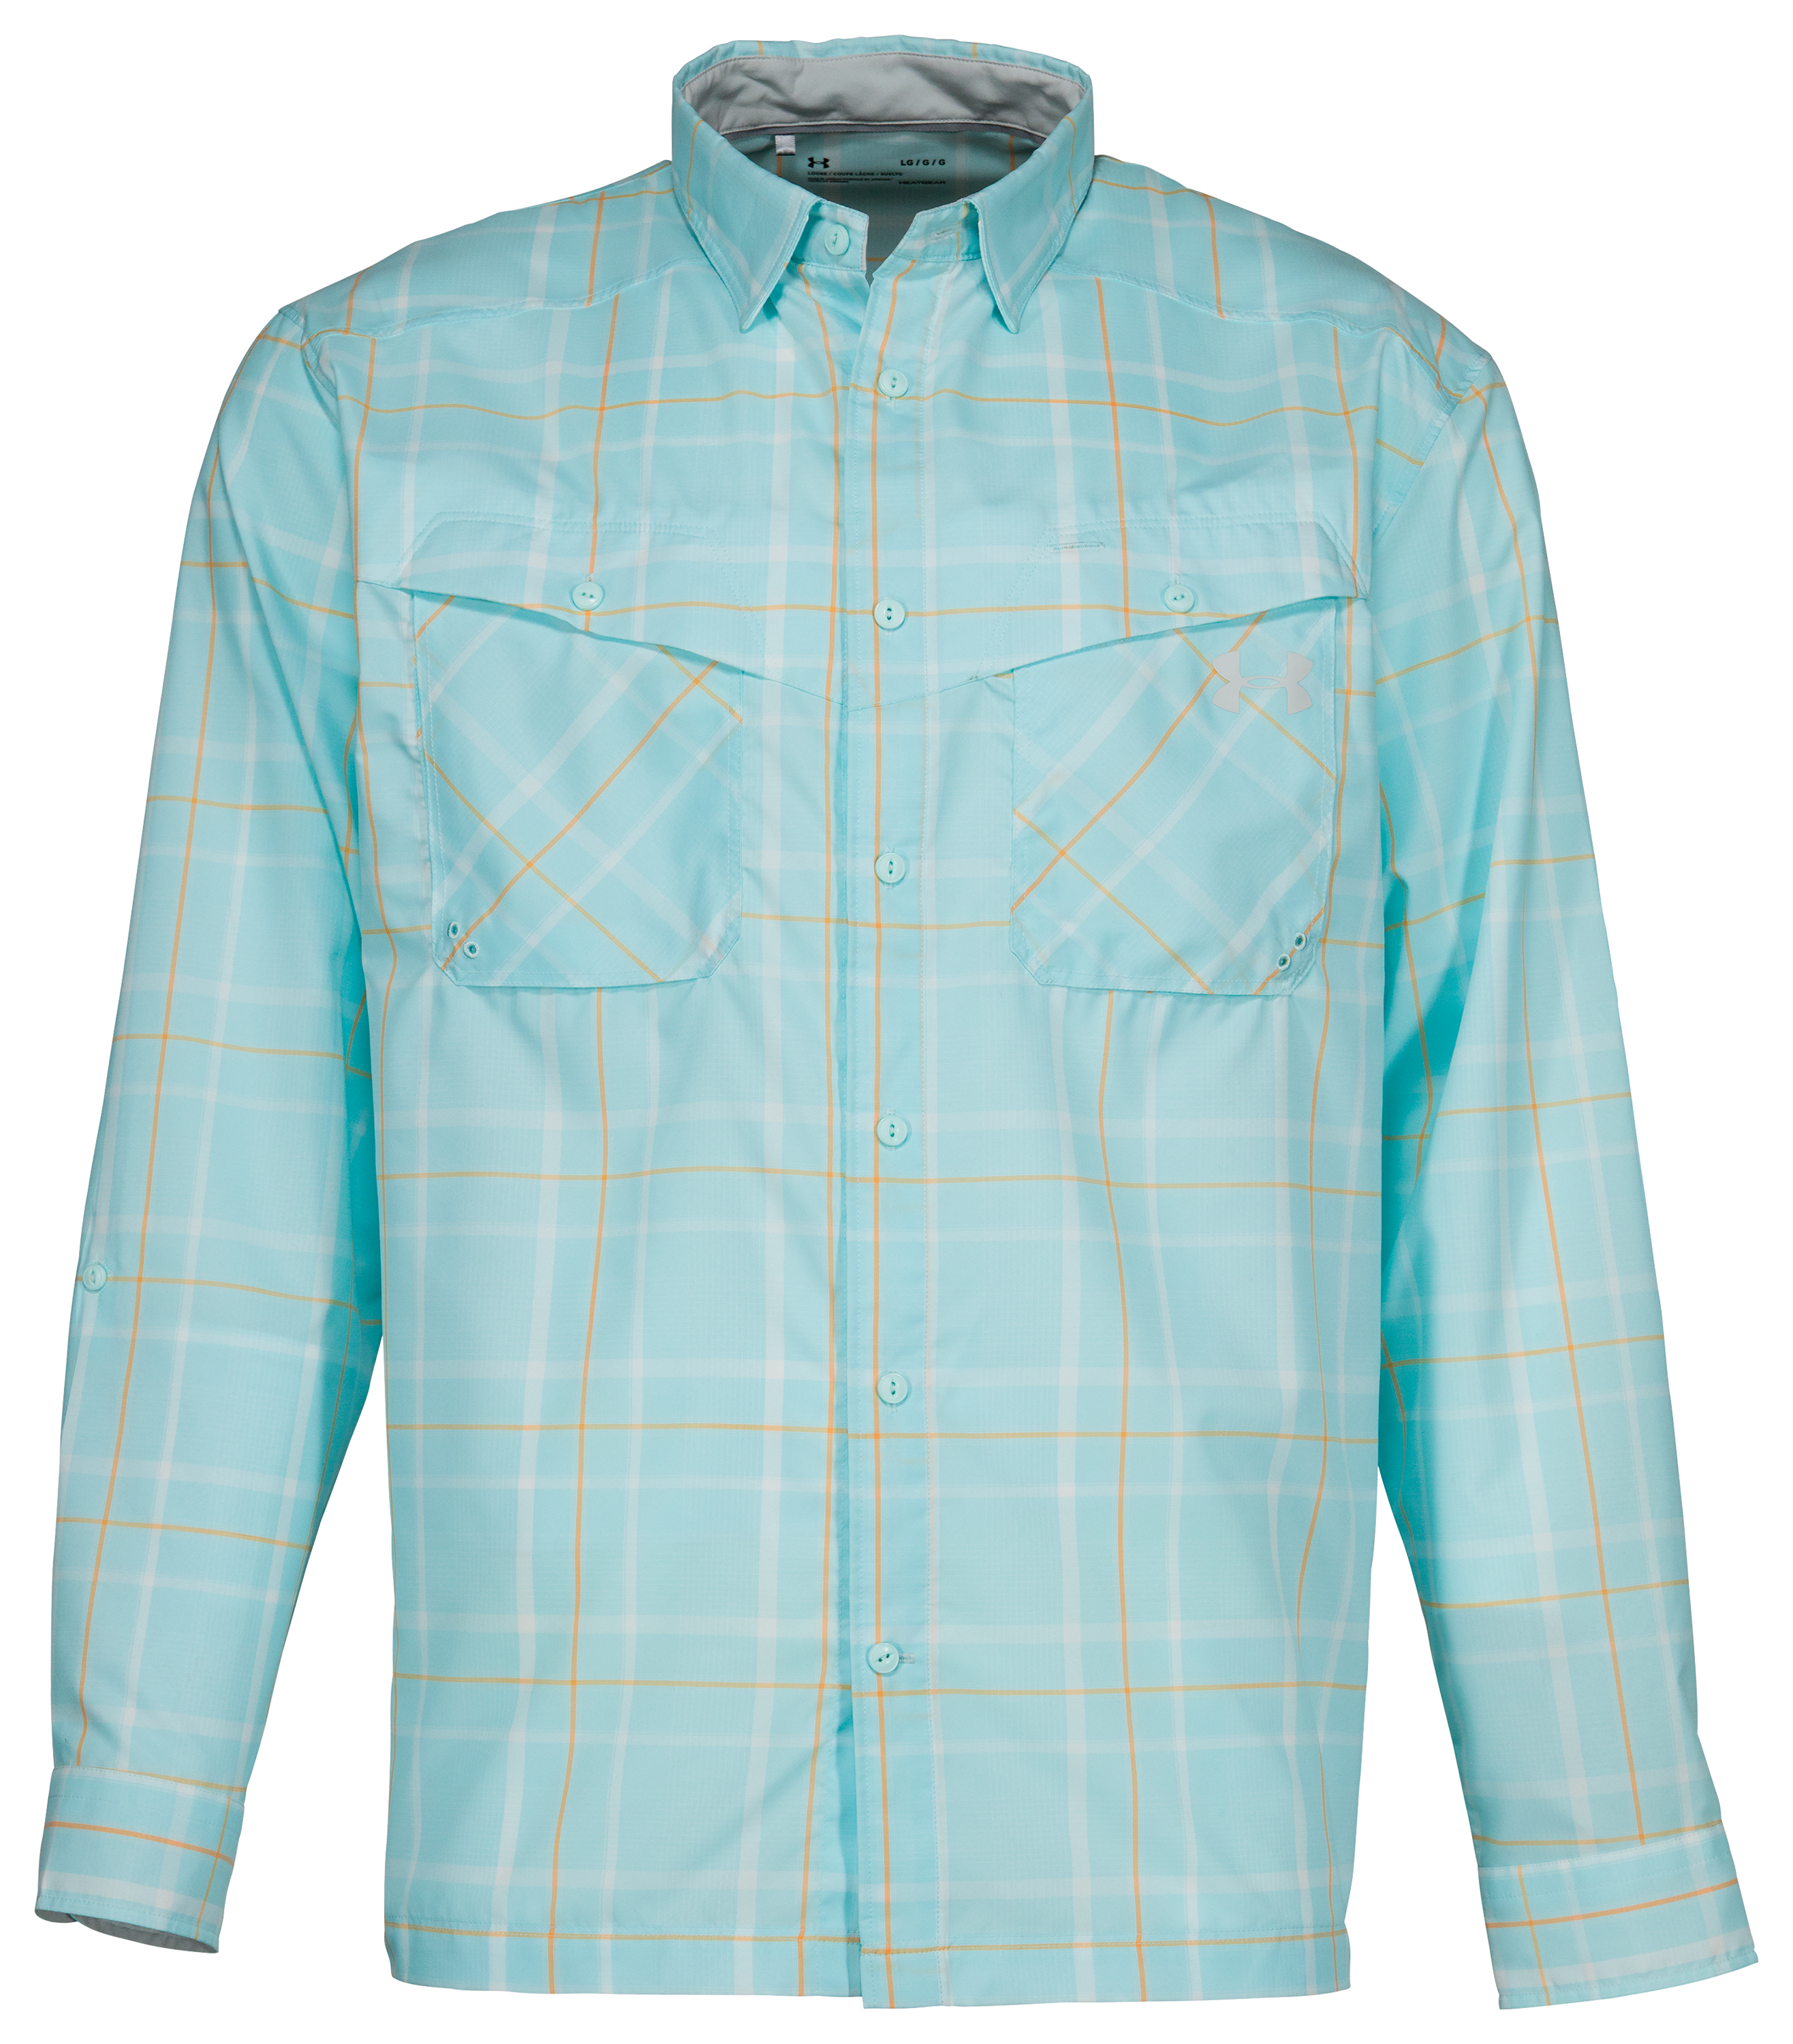 Under Armour Tide Chaser Plaid Long-Sleeve Fishing Shirt for Men